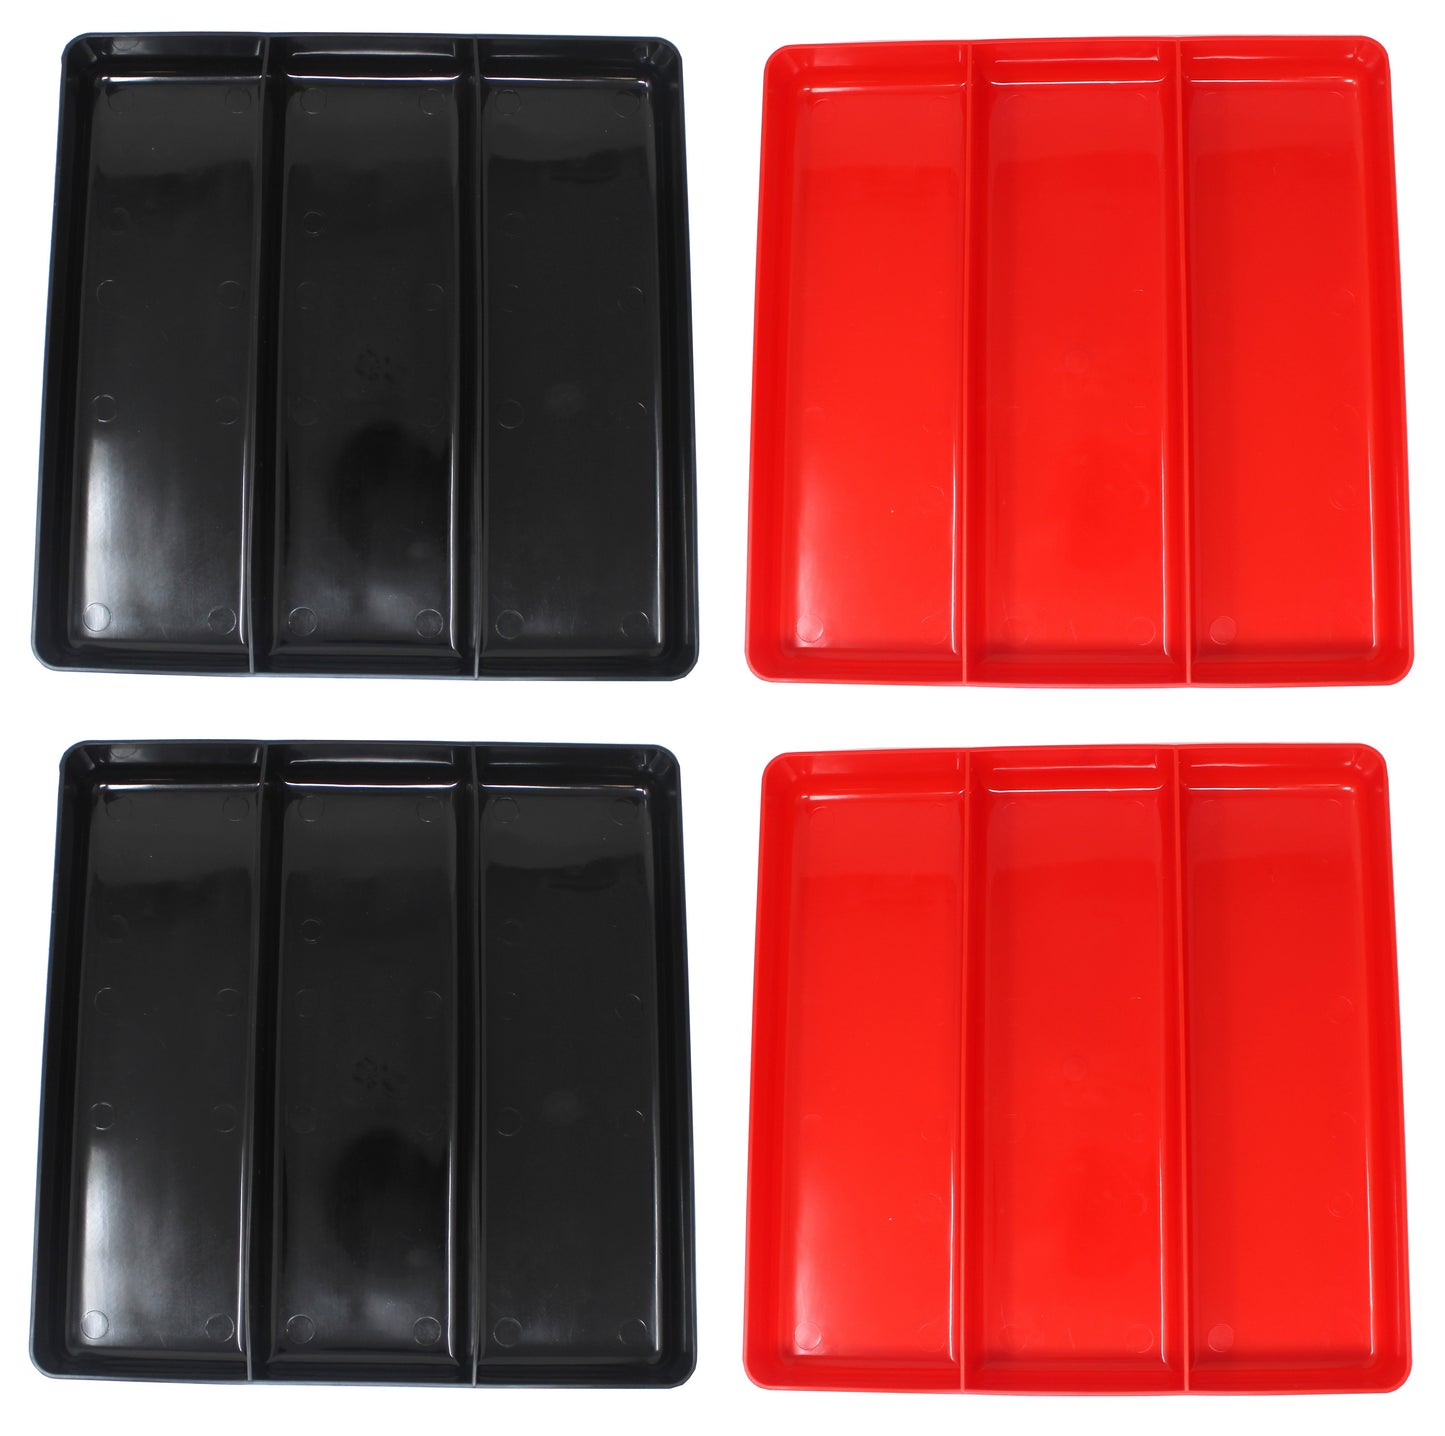 Black & Red Stackable Lightweight 3 Compartment Organizer Tray Kit